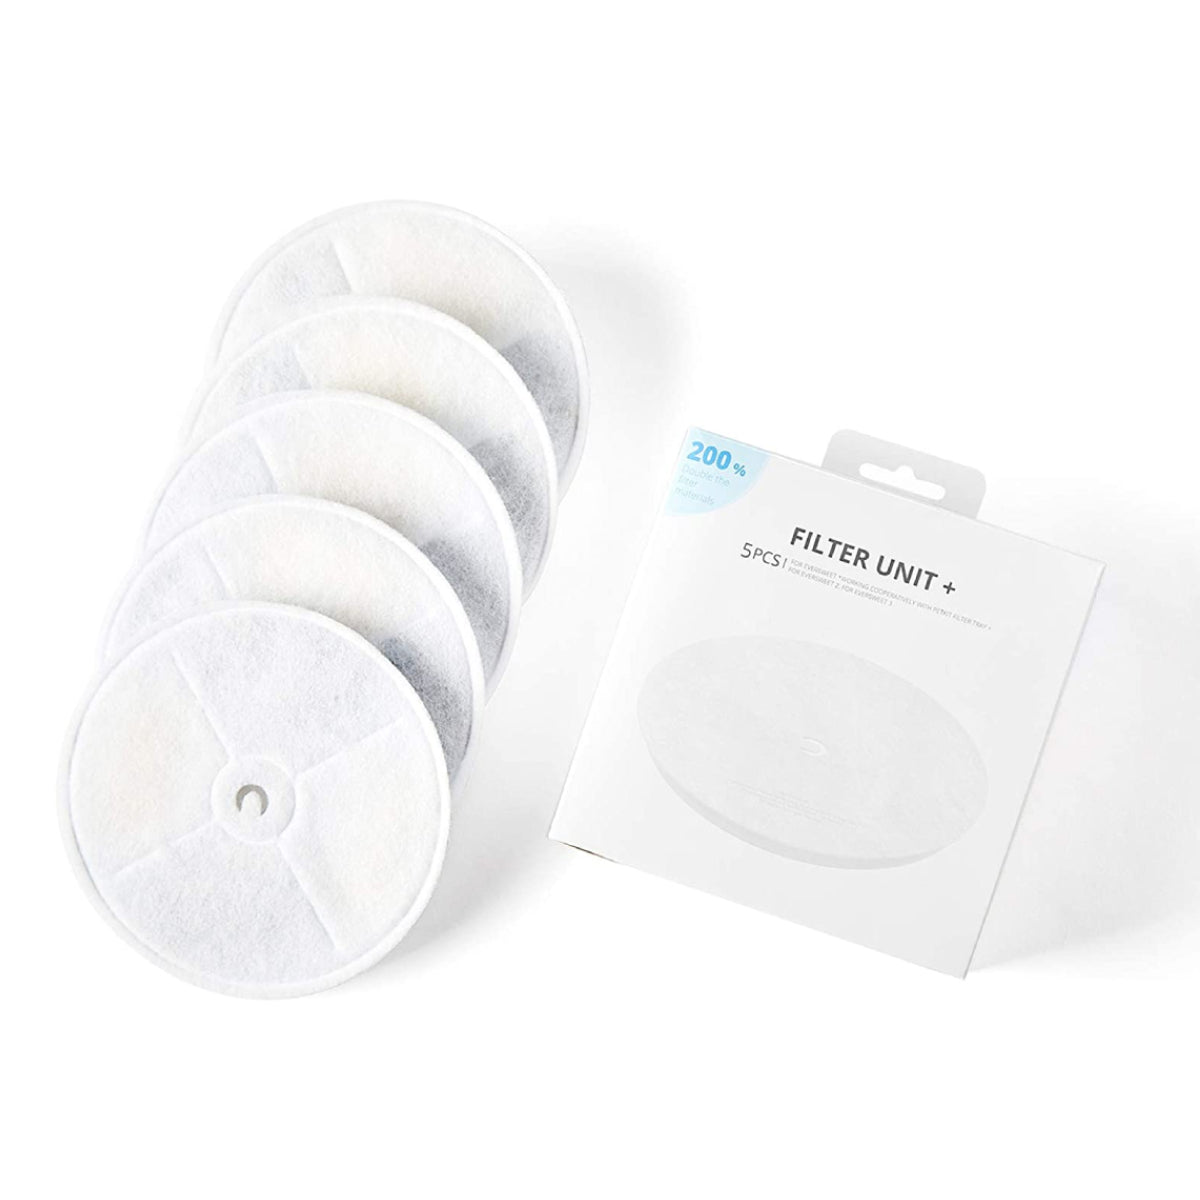 Petkit Filter Units for Water Fountain, Replacement Filters - 5 Pcs - Store 974 | ستور ٩٧٤